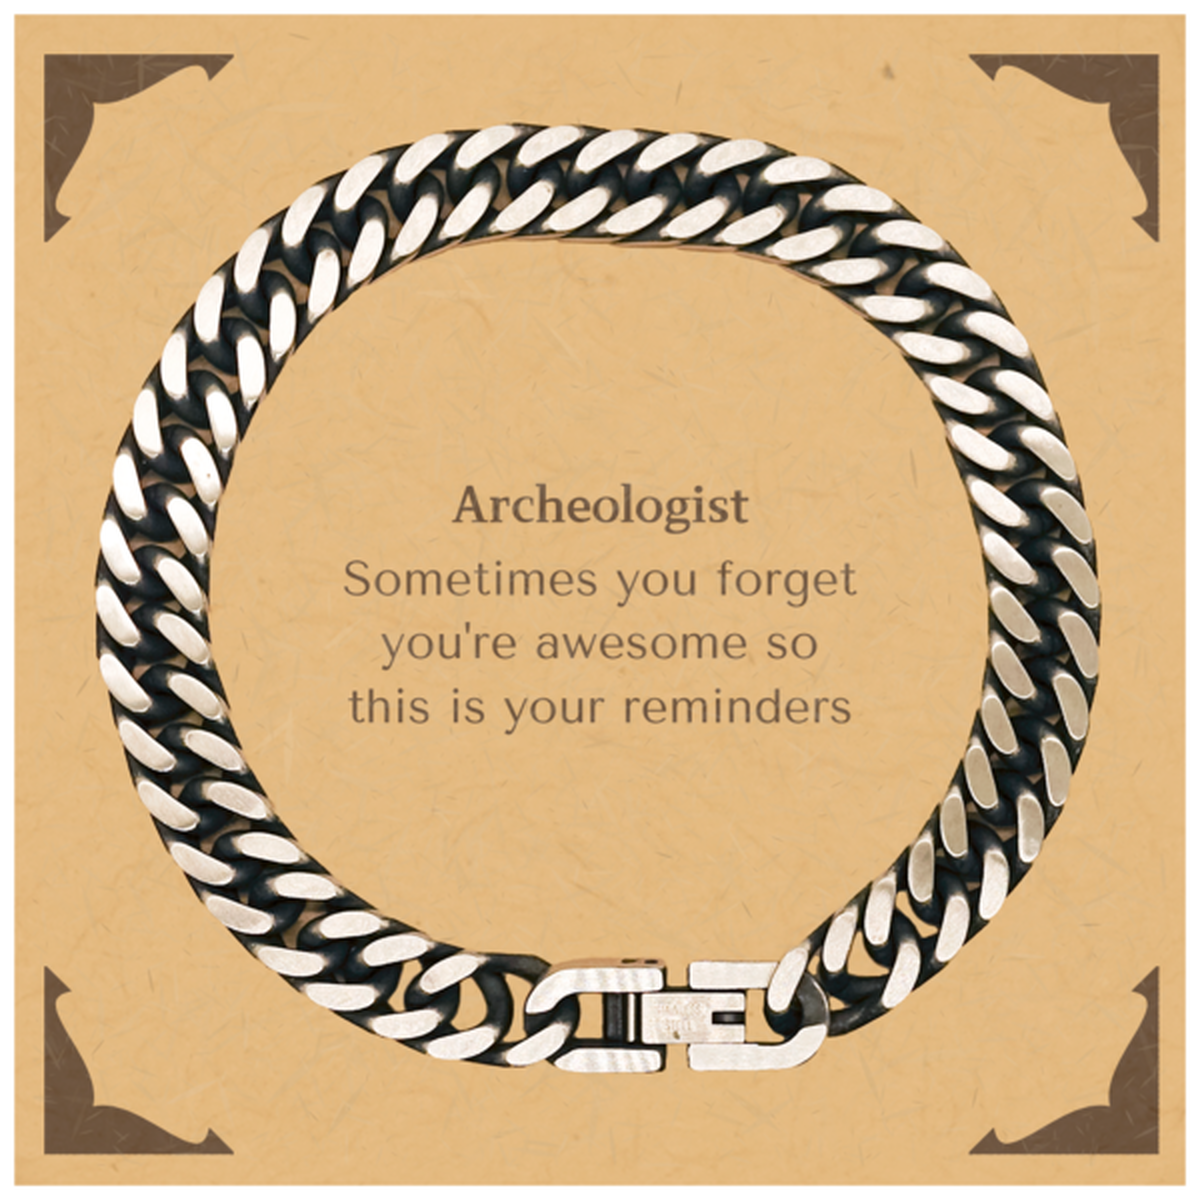 Sentimental Archeologist Cuban Link Chain Bracelet, Archeologist Sometimes you forget you're awesome so this is your reminders, Graduation Christmas Birthday Gifts for Archeologist, Men, Women, Coworkers